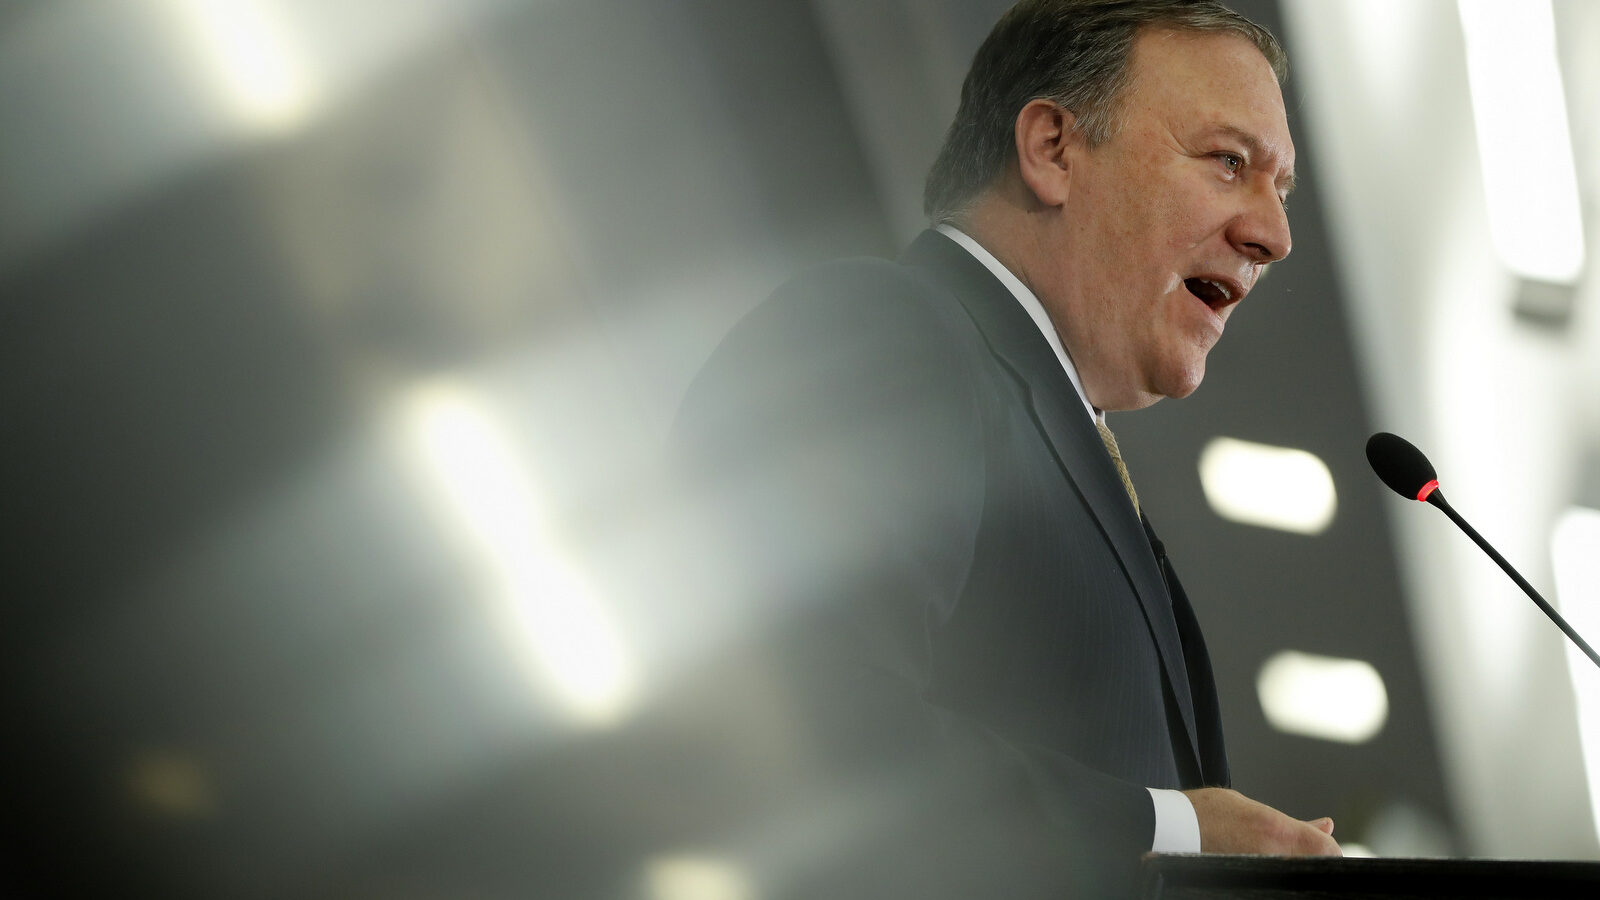 CIA Director Mike Pompeo speaks at the Center for Strategic and International Studies (CSIS) in Washington, Thursday, April 13, 2017. Pompeo denounced WikiLeaks, calling the anti-secrecy group a "hostile intelligence agency." (AP/Pablo Martinez Monsivais)